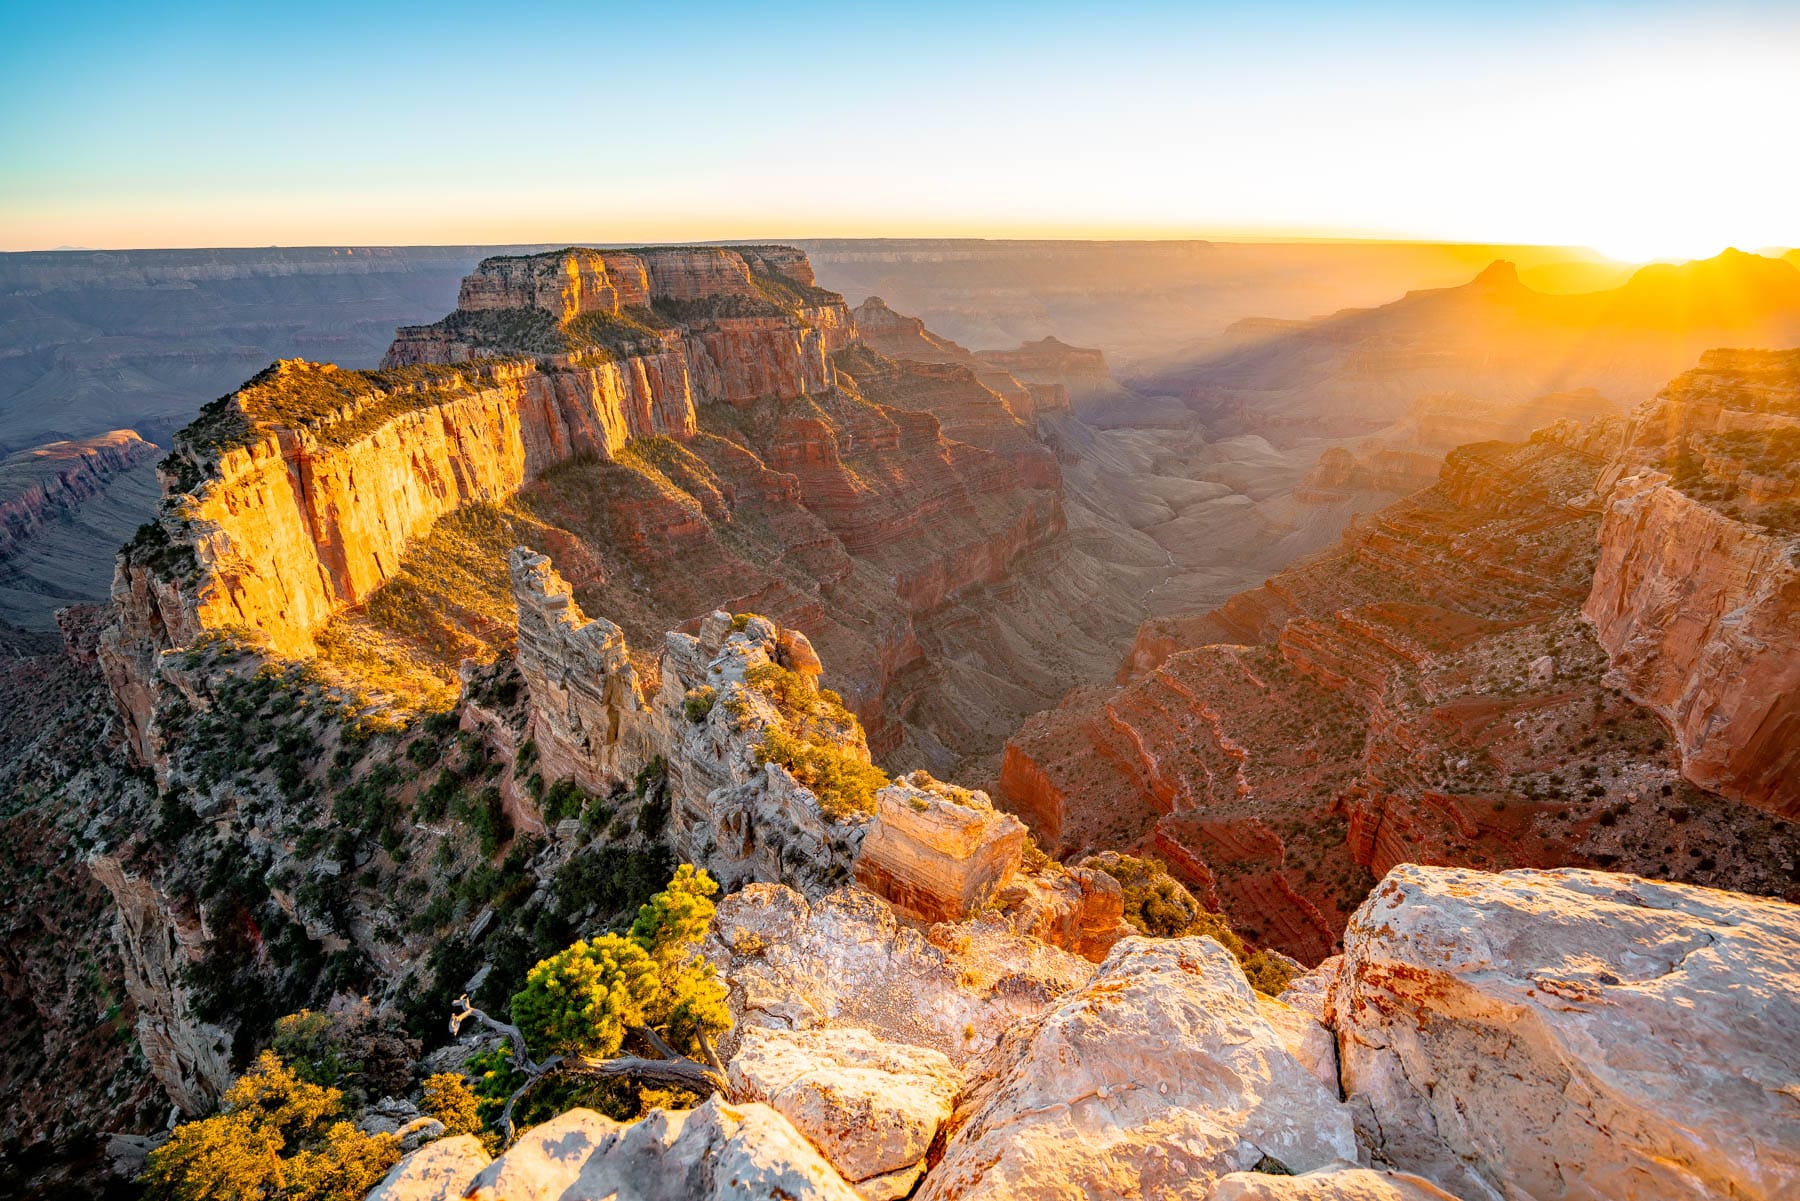 20 EPIC Things to Do at the Grand Canyon (Helpful Guide + Photos)